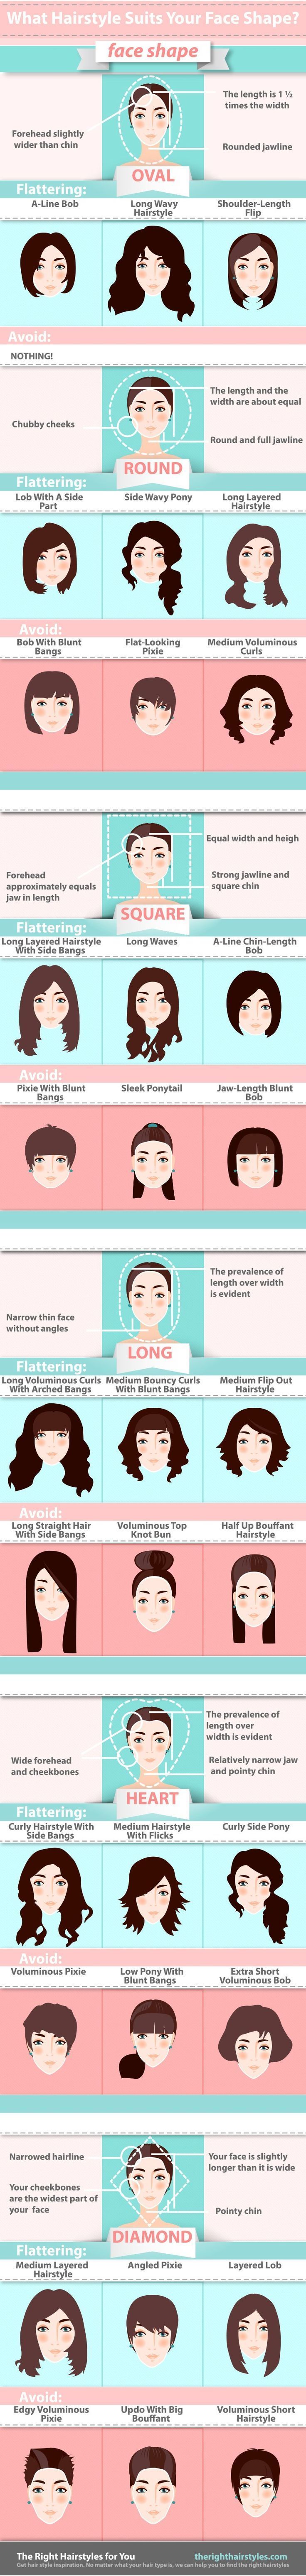 Guide: The Perfect Hairstyle For Your Face Shape | Best Beauty Tips And Fashion ...